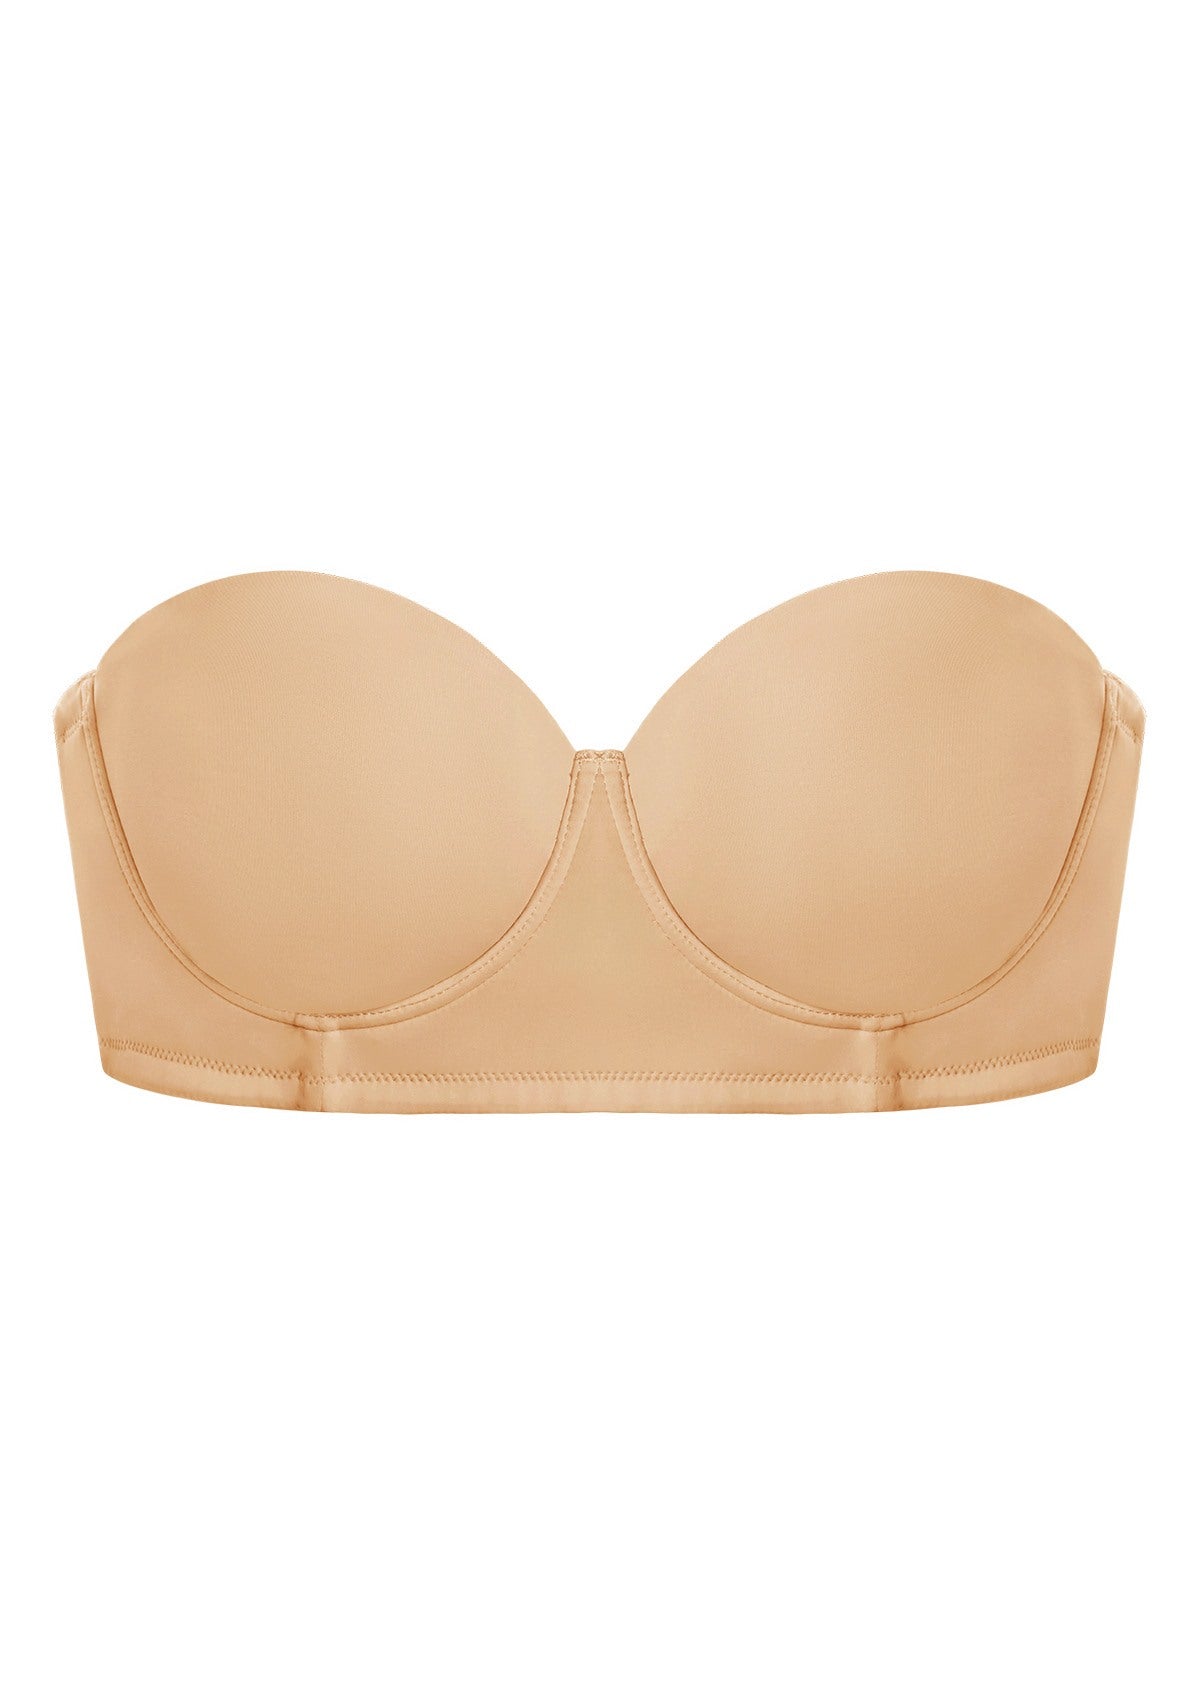 HSIA Margaret Molded Convertible Multiway Classic Strapless Bra - Nude / 34 / H